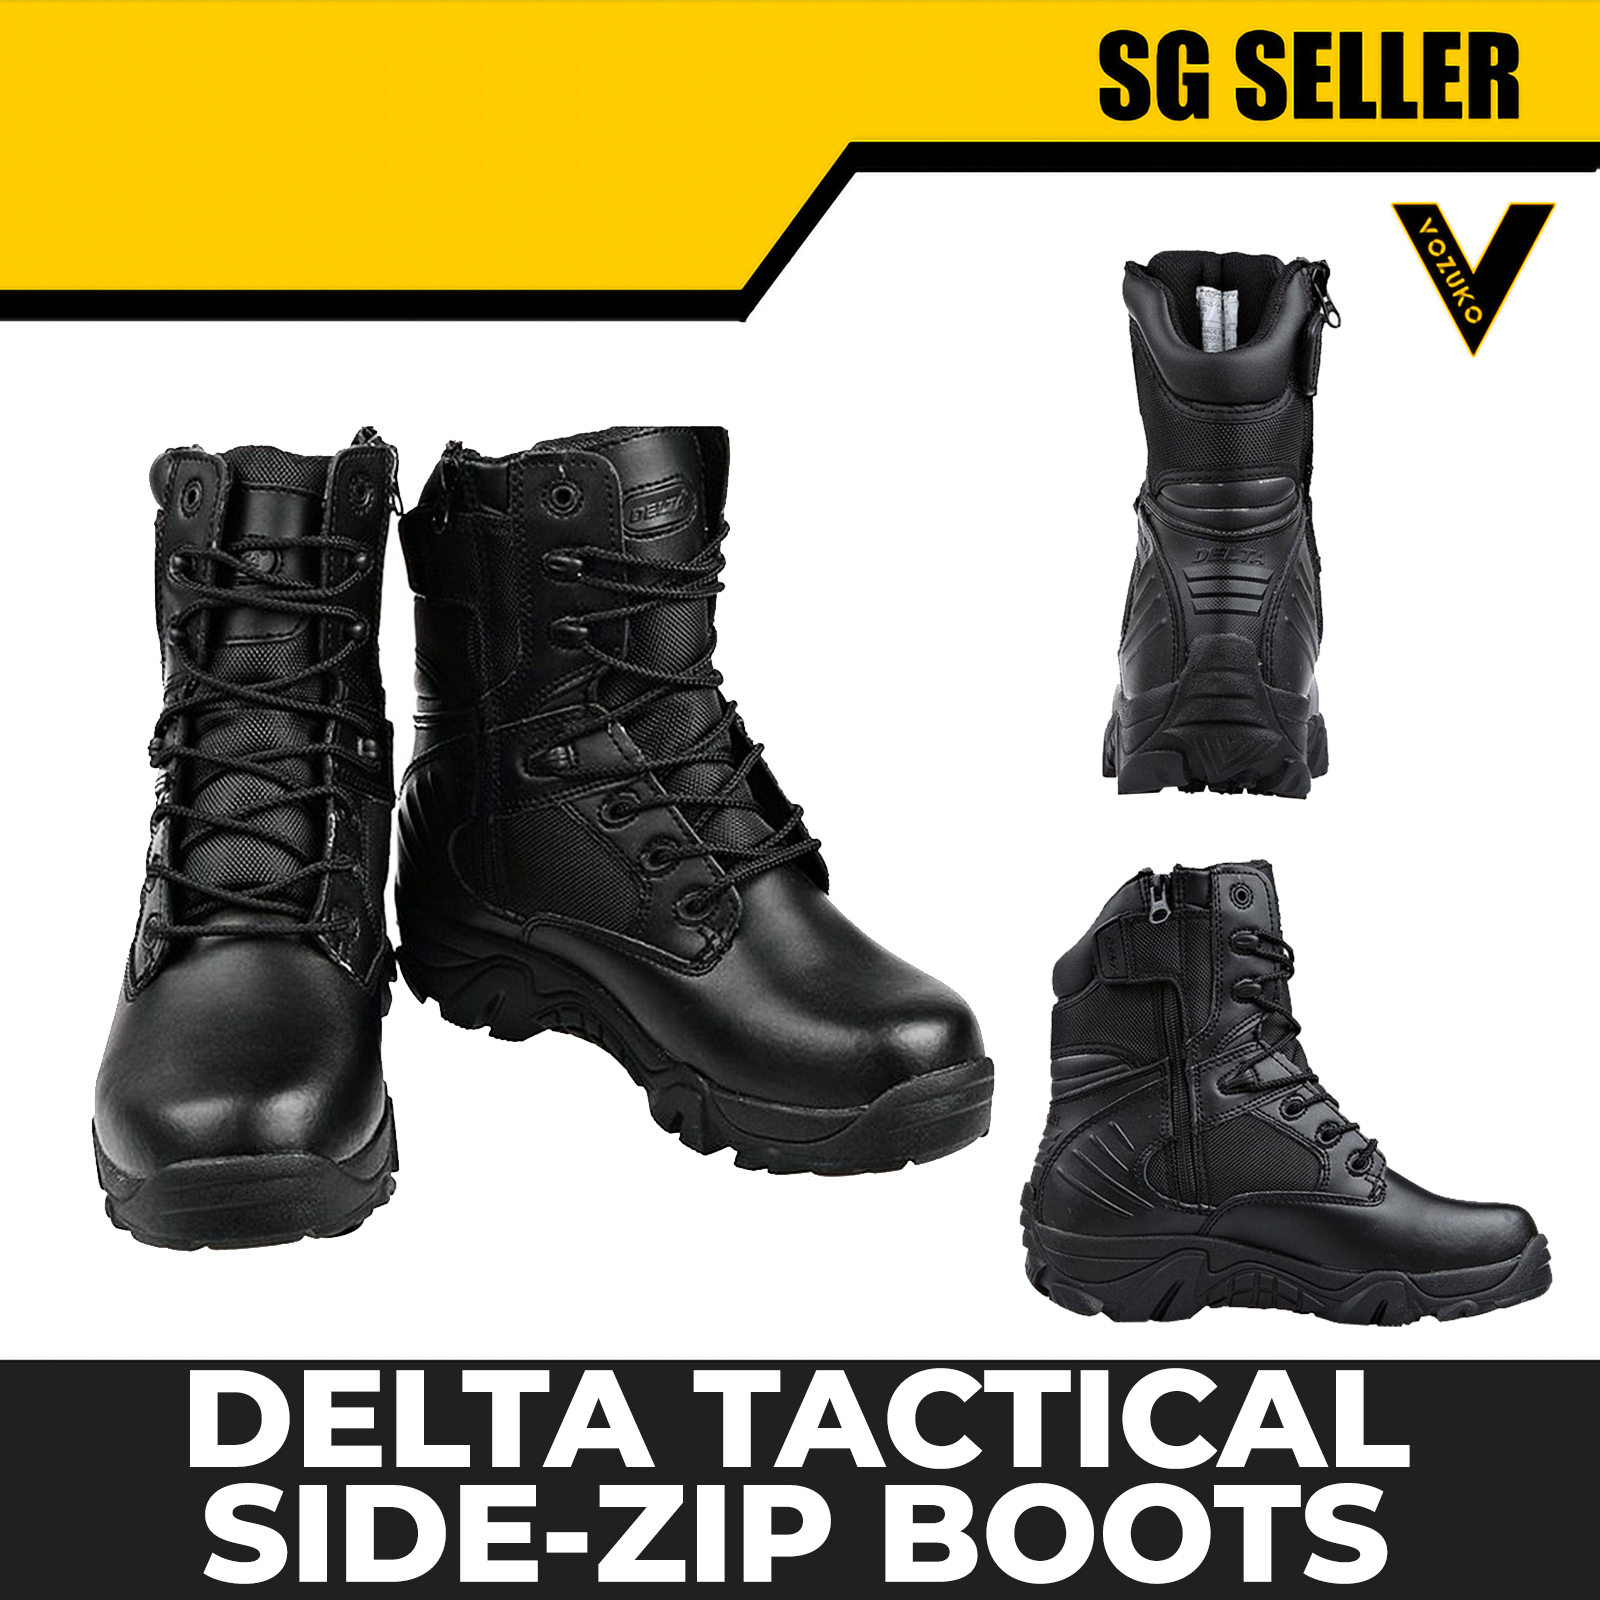 Sg Seller Vozuko Delta Tactical Side Zip Boots Made Of Nylon And Leather 319 Lazada Singapore